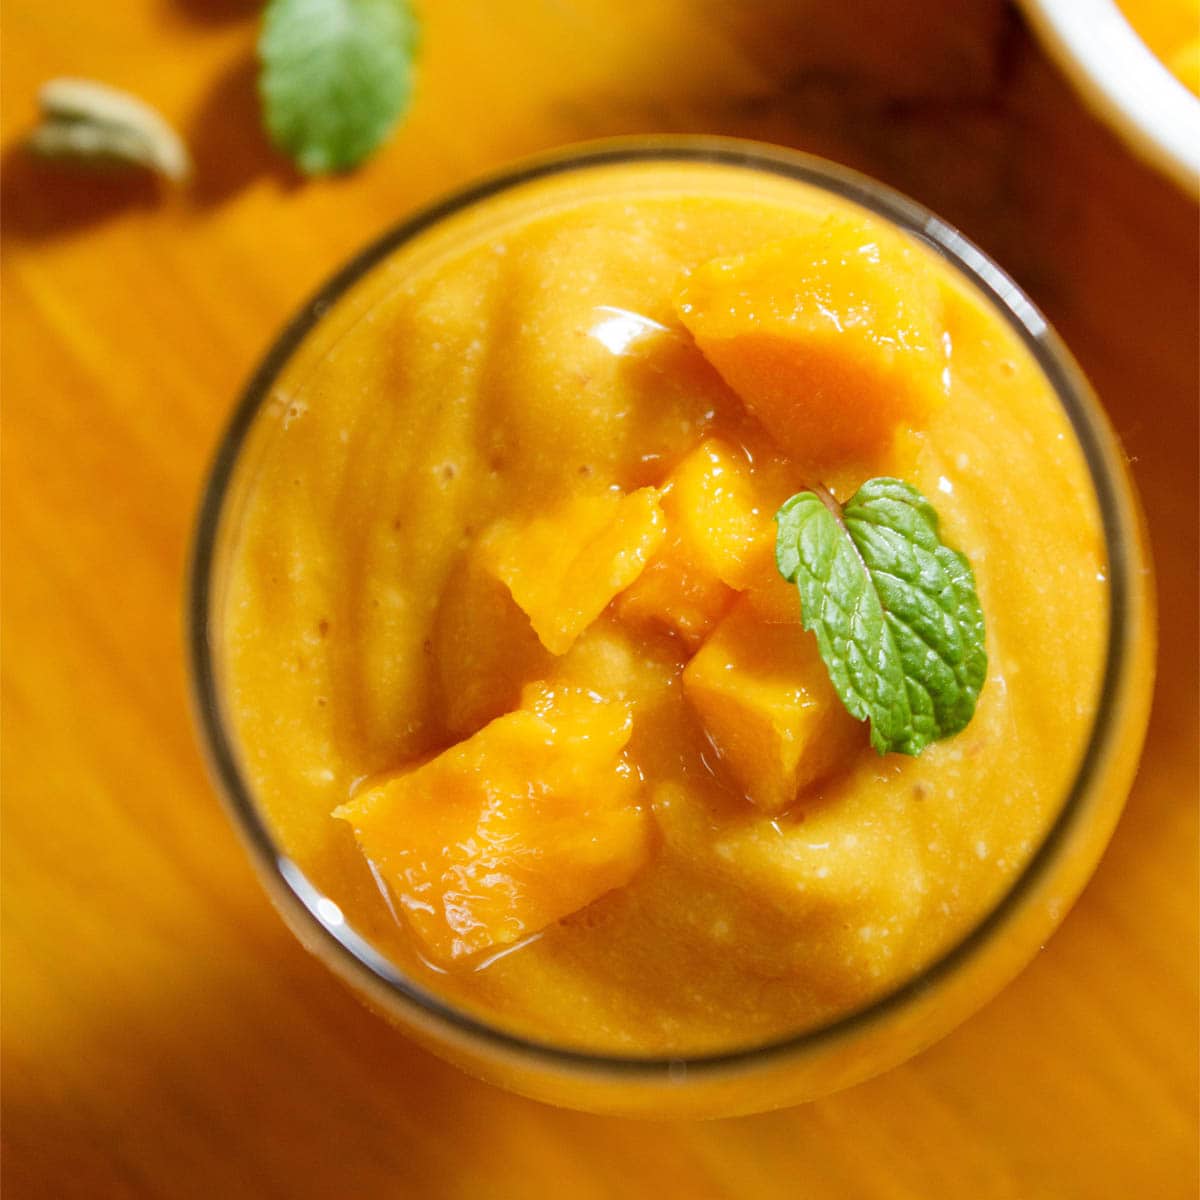 mango smoothie with almonds in a glass topped with some chopped mangoes and a mint leaf